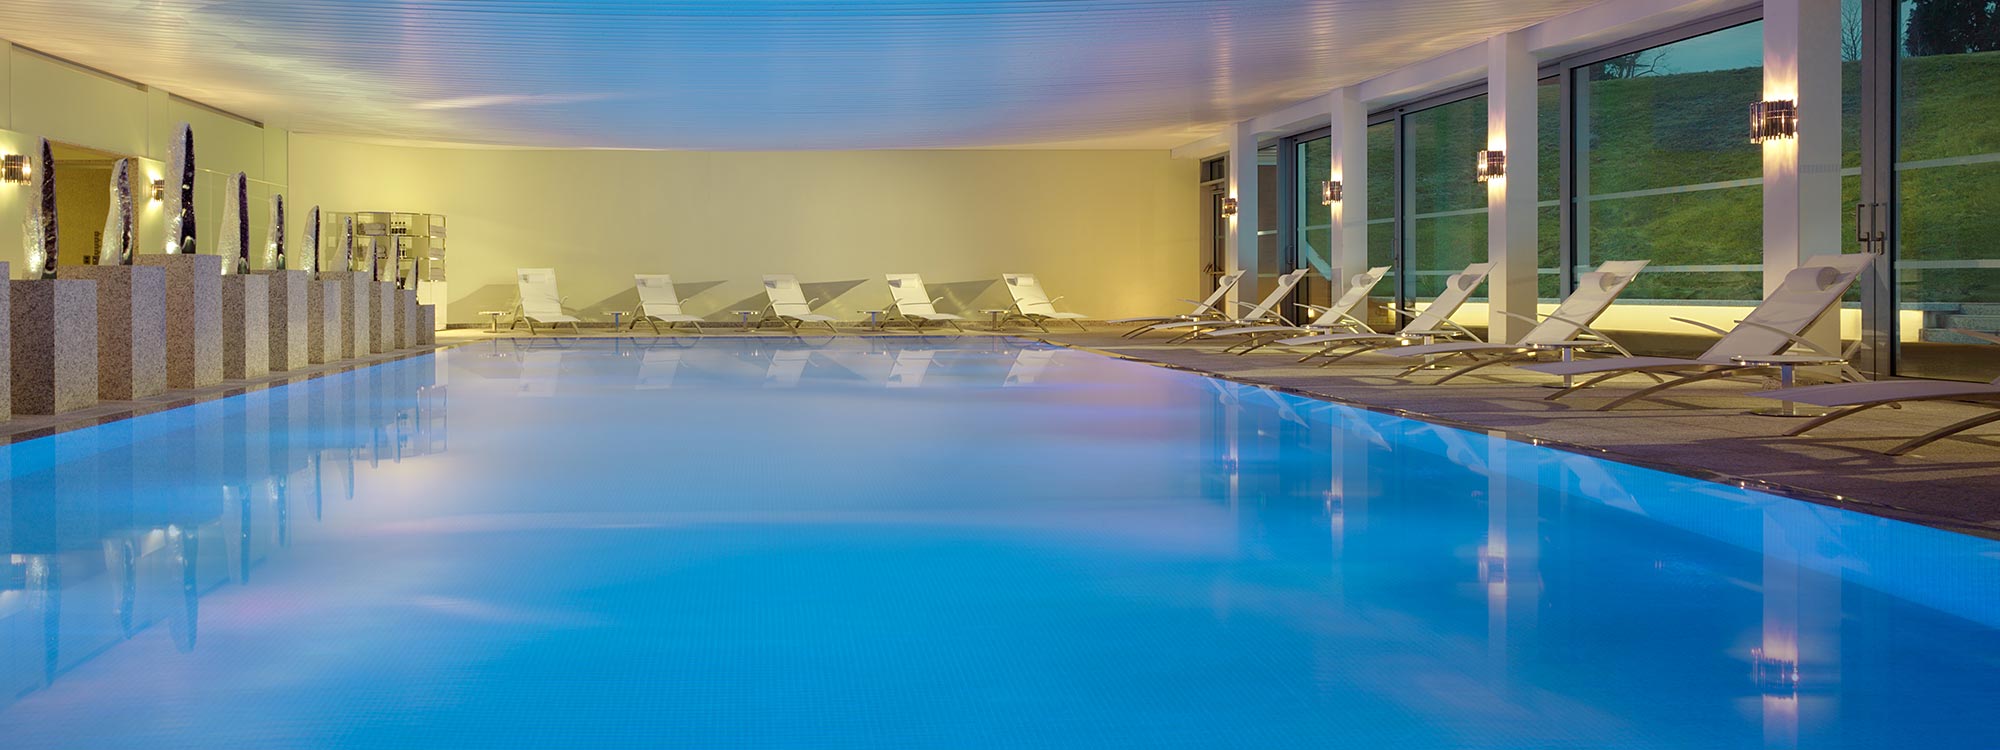 Image of Royal Botania OZON sun loungers around the indoor swimming pool at Coworth Park luxury spa